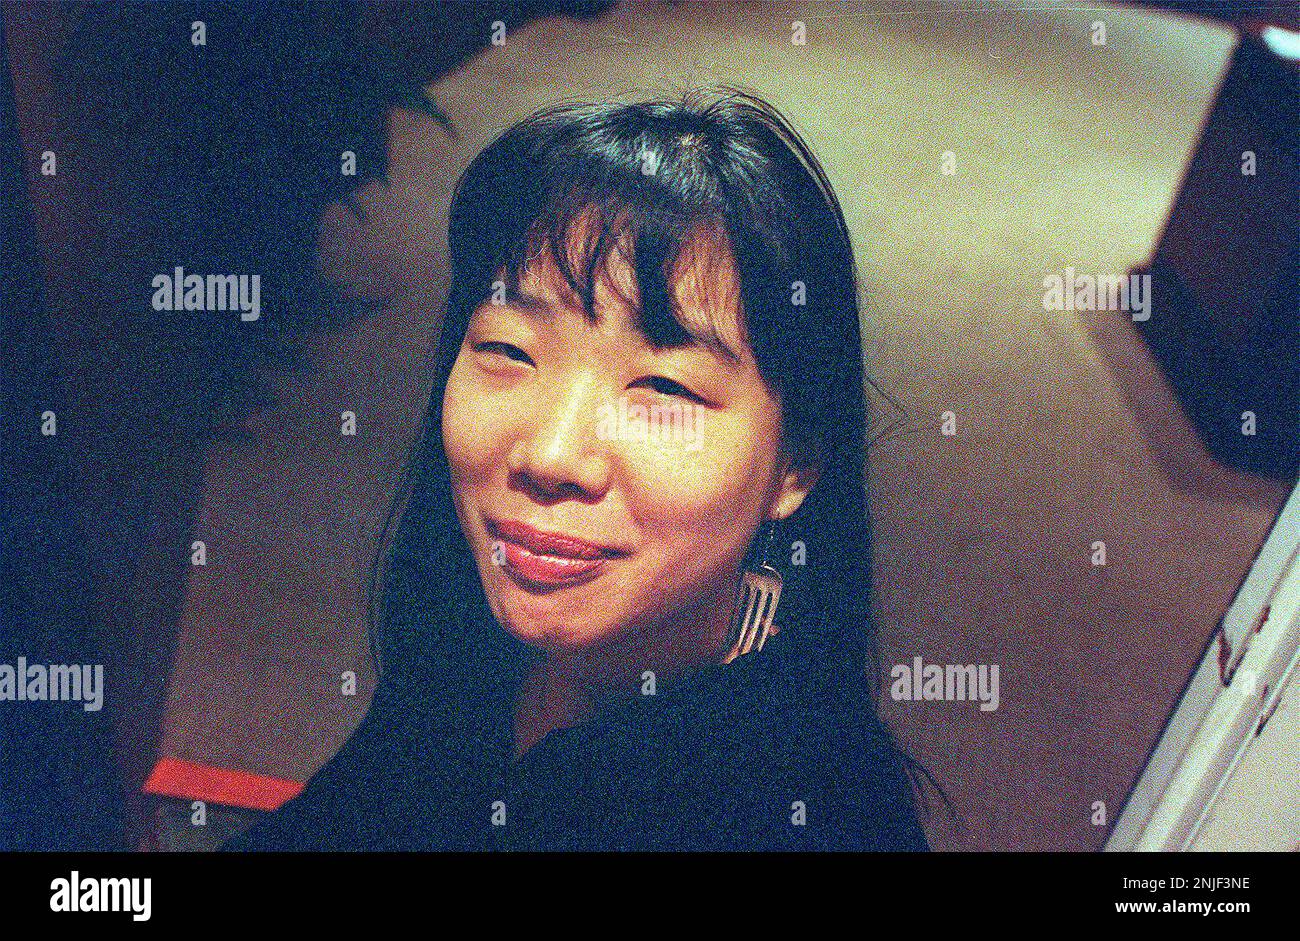 CHANG/C/06NOV98/DD/LH--Sam Chang is the current Stegner fellow at Stanford  who has written a new book of short stories that explore Asian-American  life. Photo by Liz Hafalia.. LAN SAMANTHA CHANG ALSO RAN: 3/29/99 (